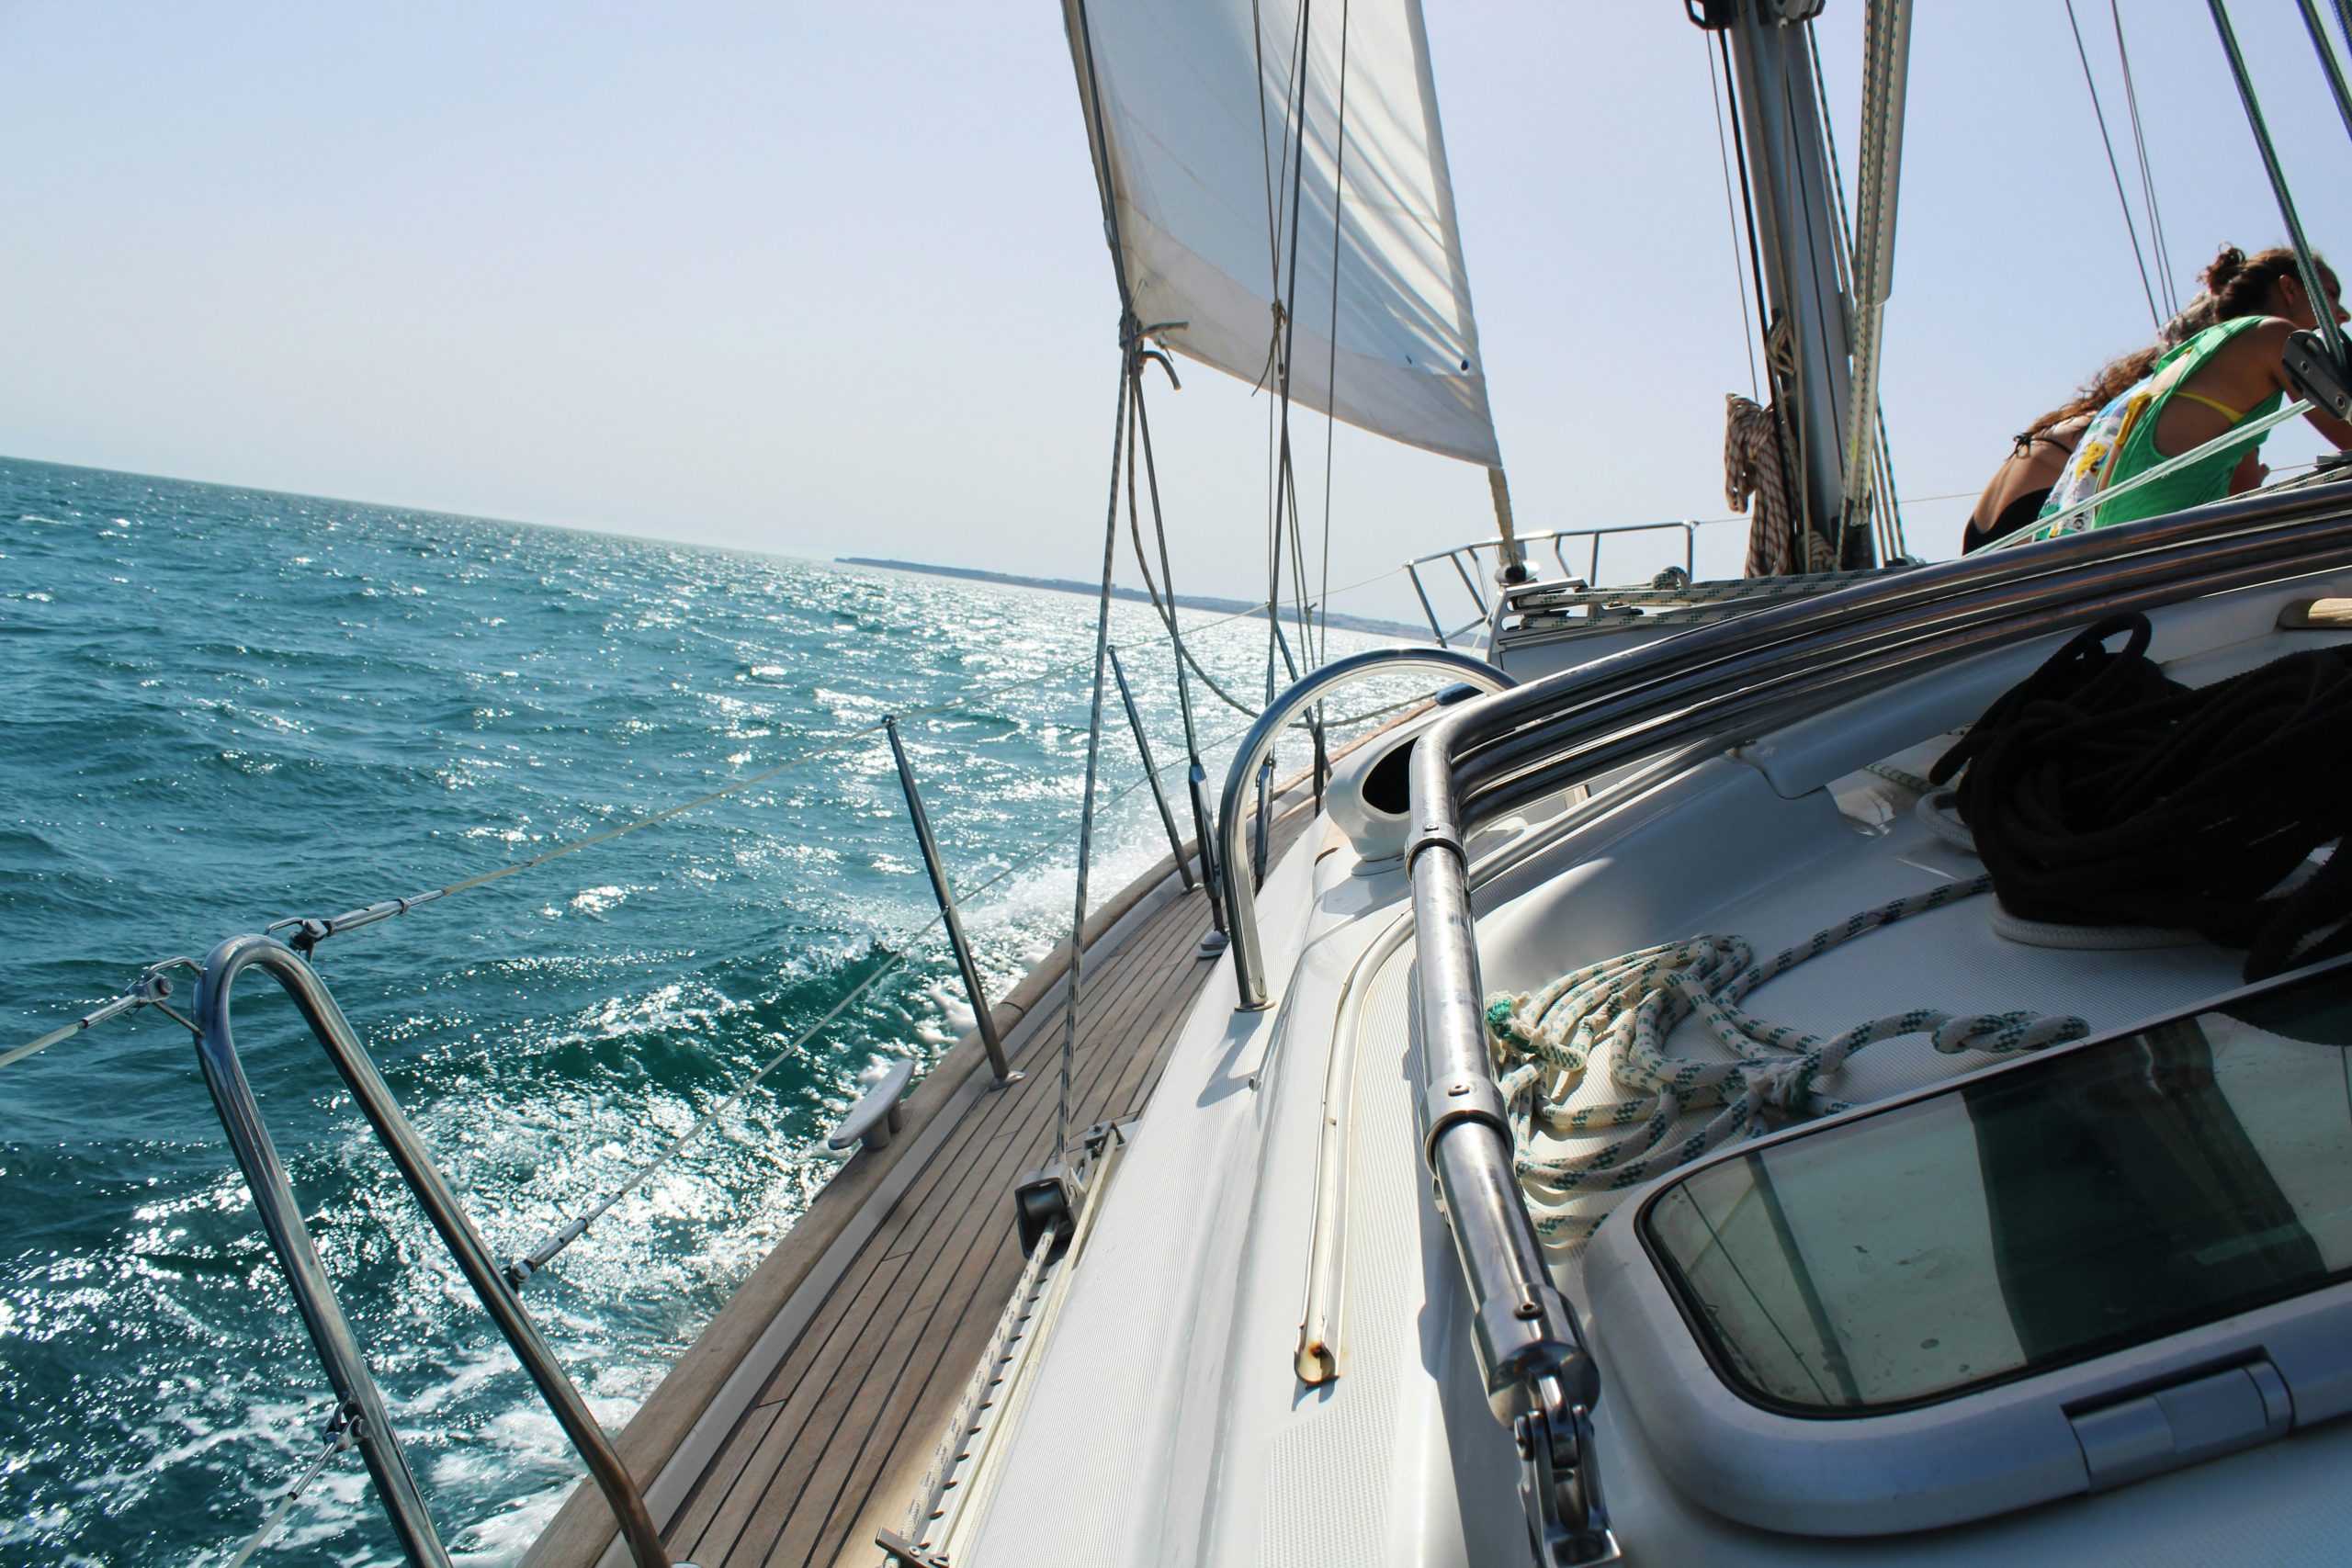 explore the joy of sailing with our expert guides and embark on an unforgettable adventure on the open seas.